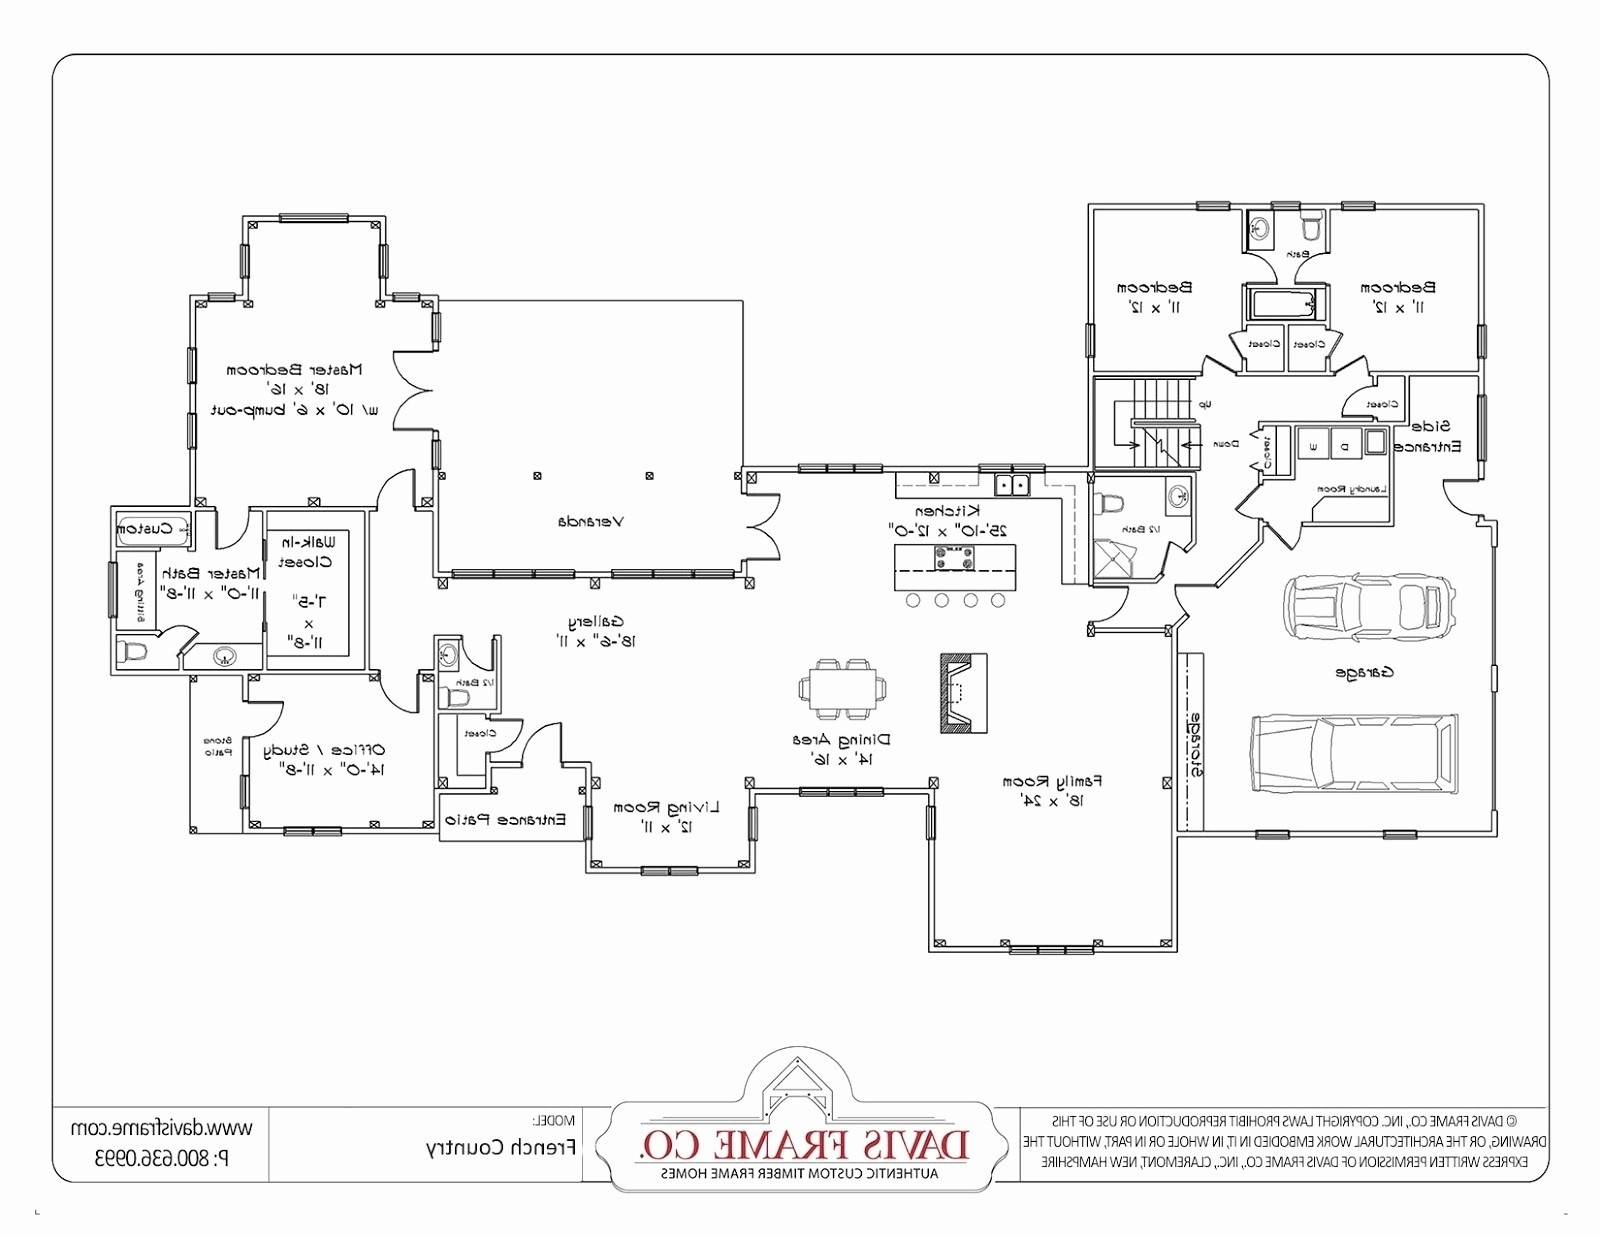 electrical wiring diagram house Drawing Plan for House Awesome Inspirational Awesome Barn Home Floor Plans DOWNLOAD Wiring Diagram Details